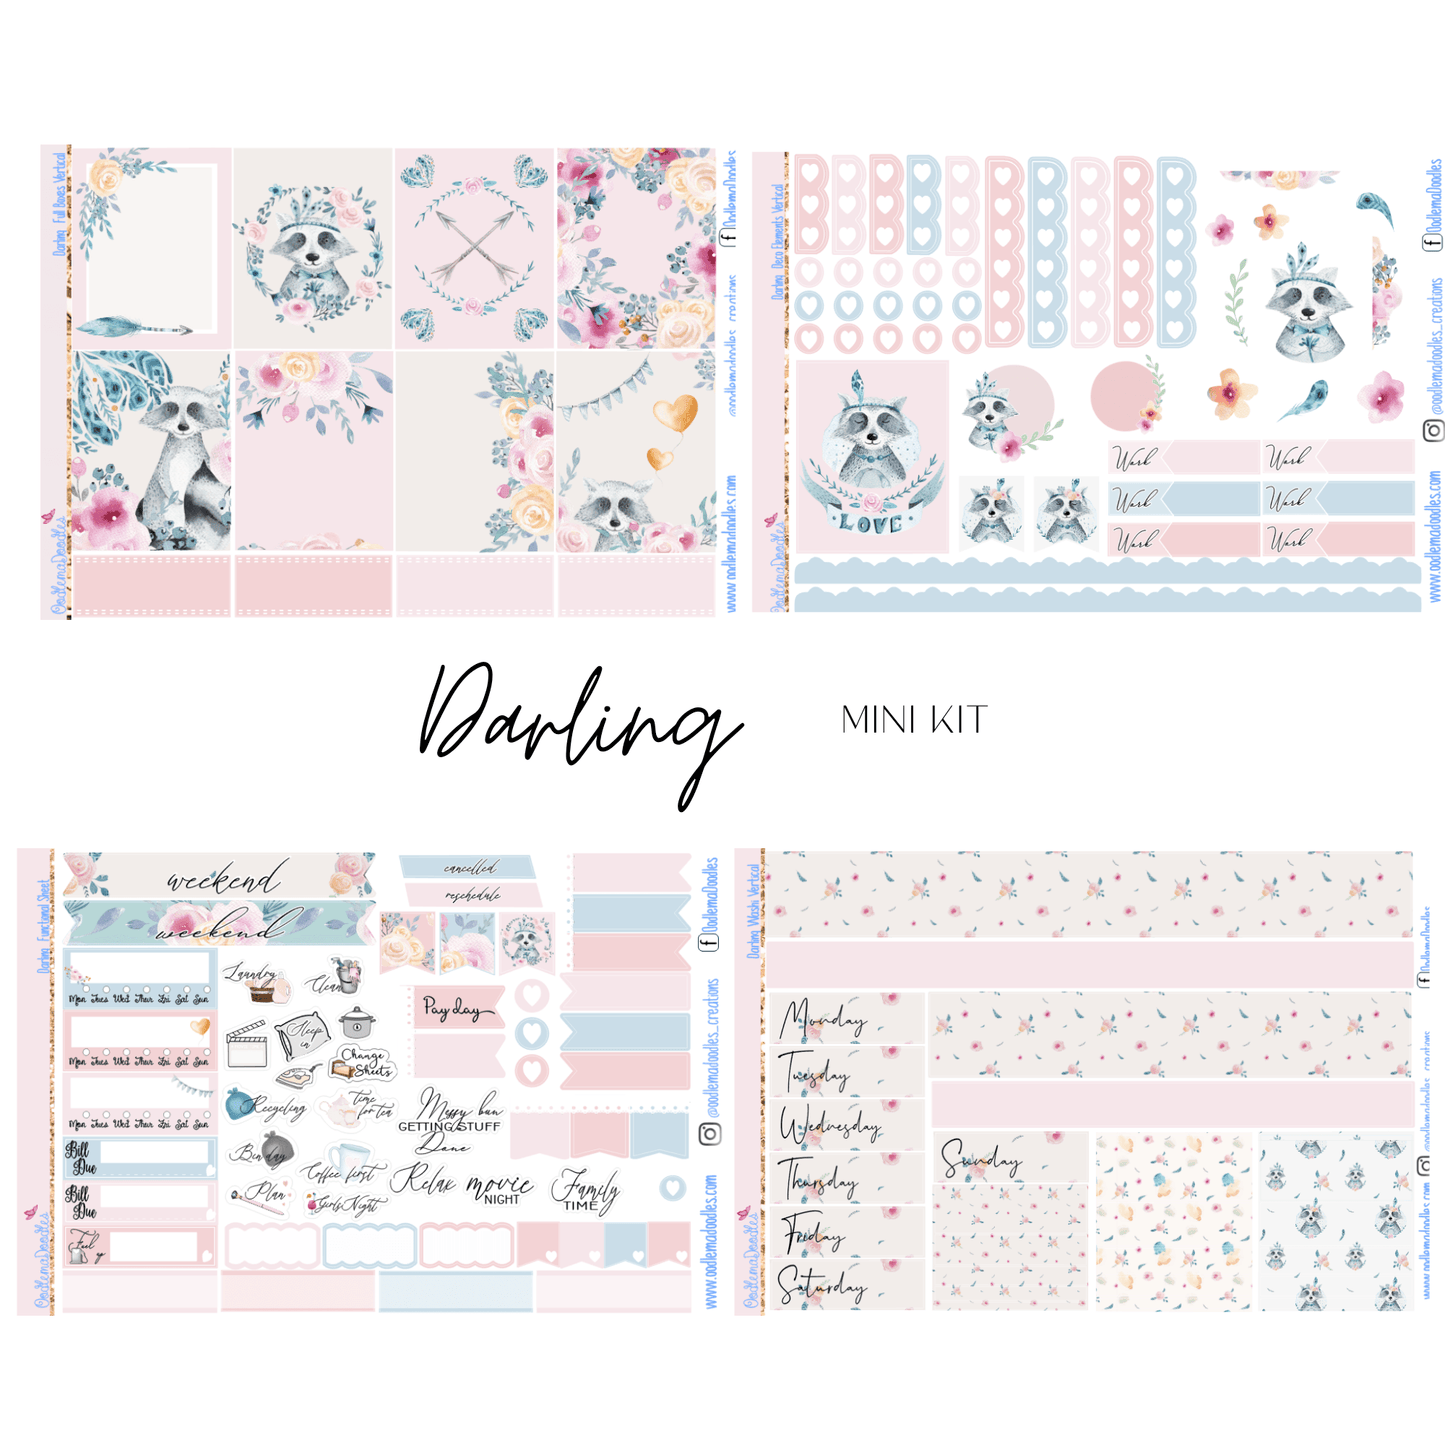 Darling Mini Kit - oodlemadoodles